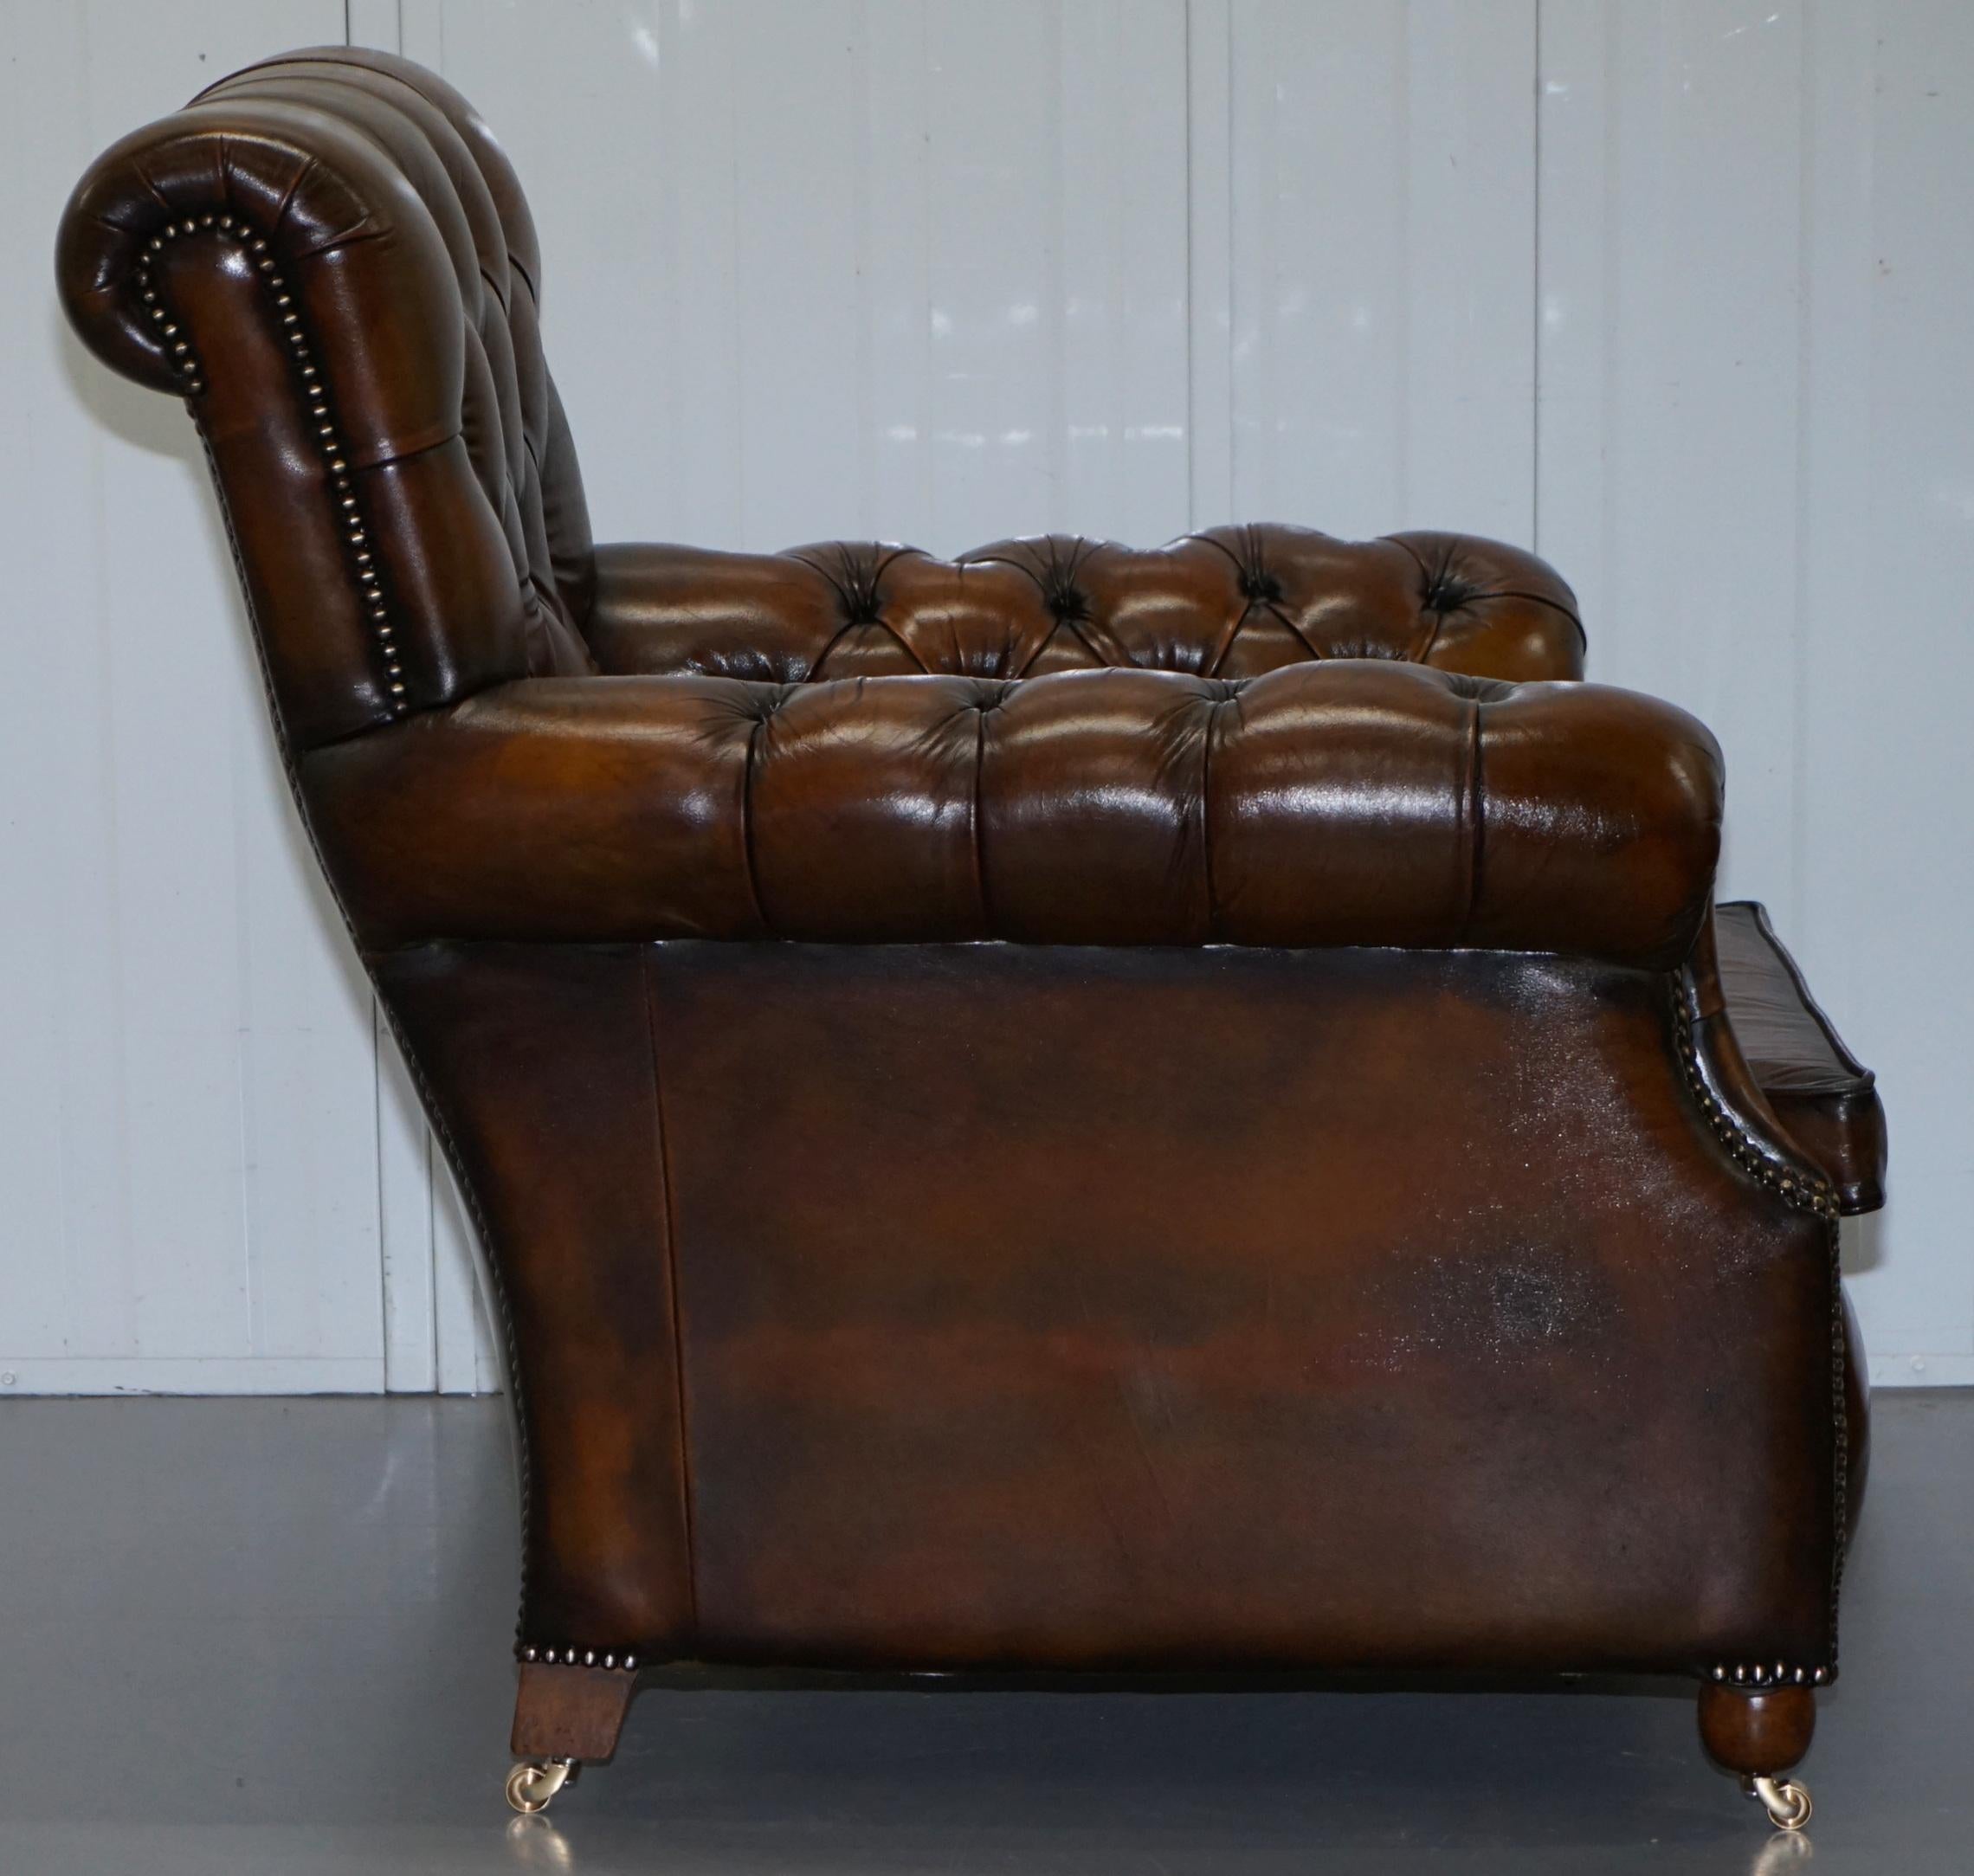 Restored Victorian Brown Leather Chesterfield Club Armchair Drop Arm Sofa Suite 4